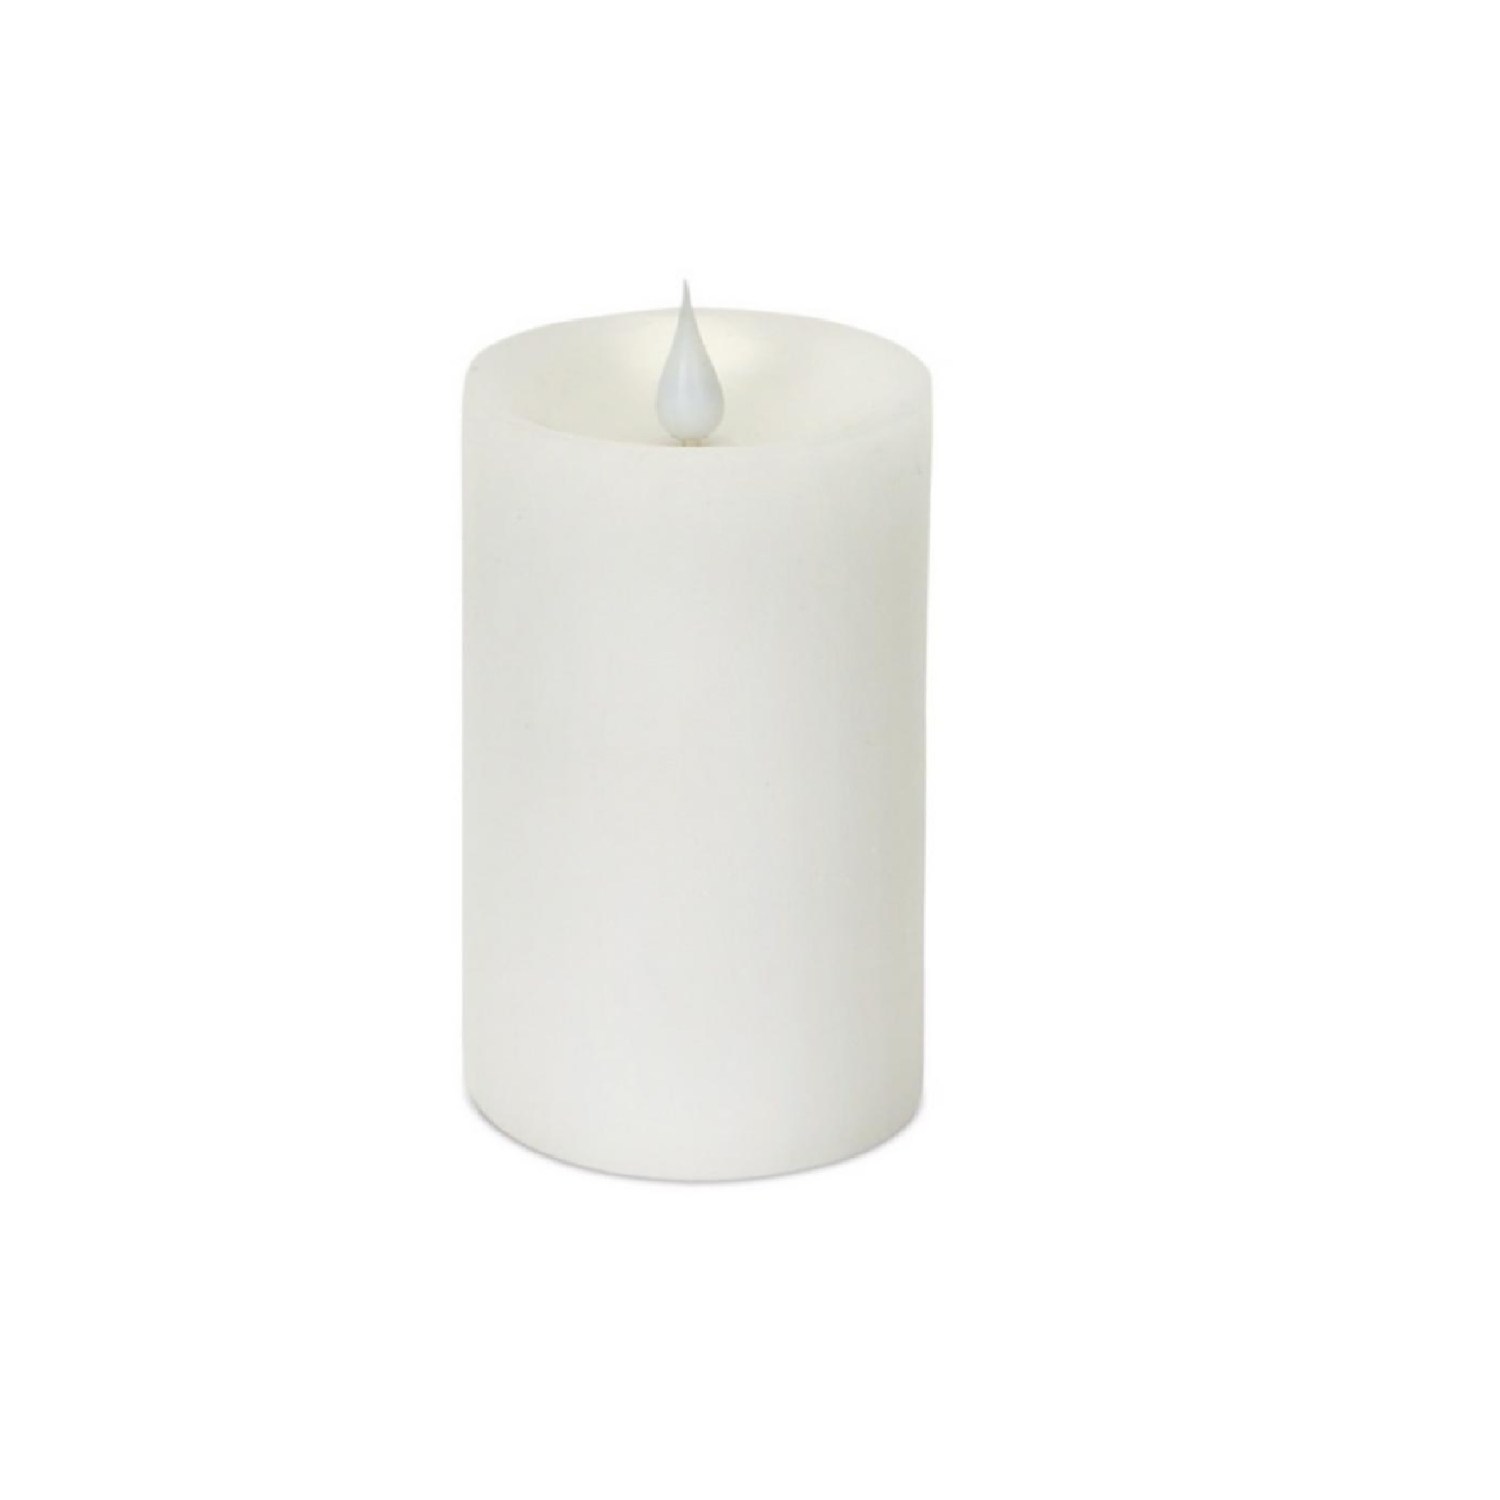 5.25" Battery Operated White LED Flameless Pillar Candle with Moving Flame